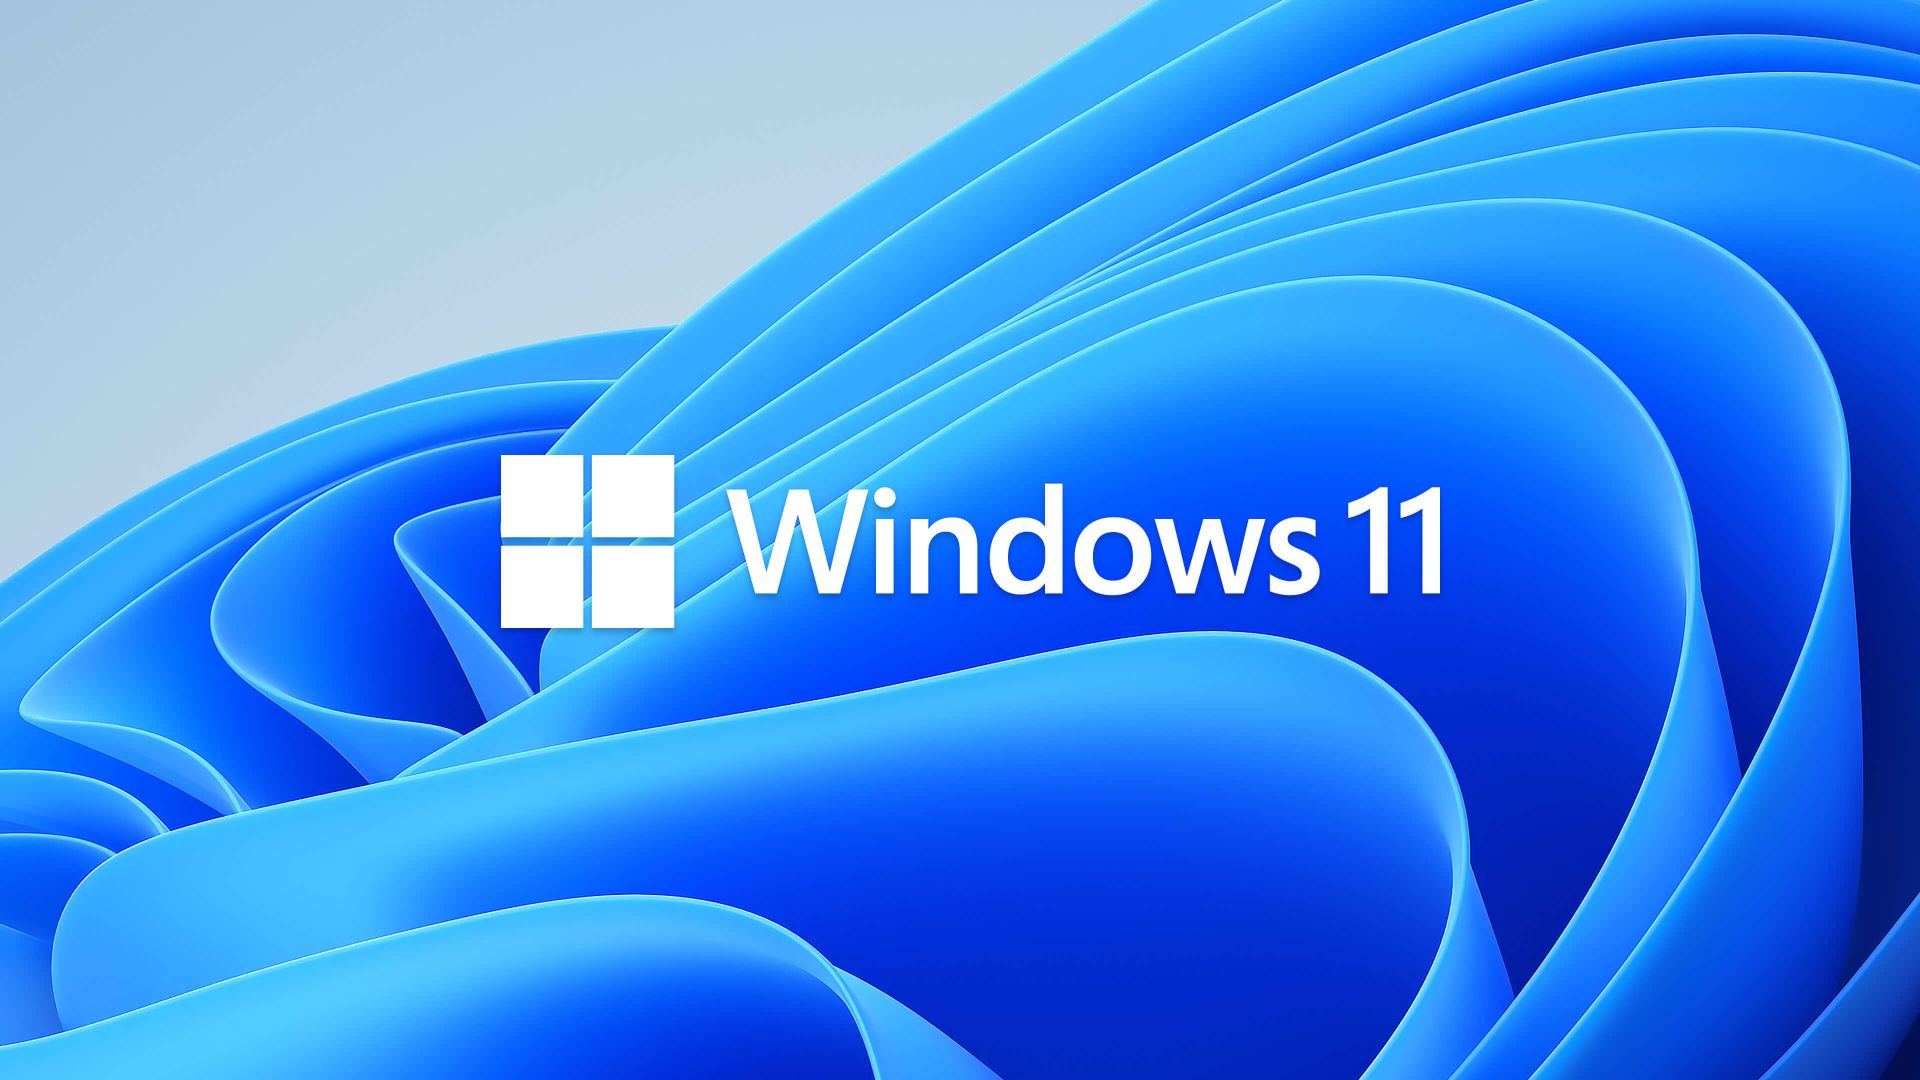 Cool Windows 11 Wallpapers You Can Freely Download